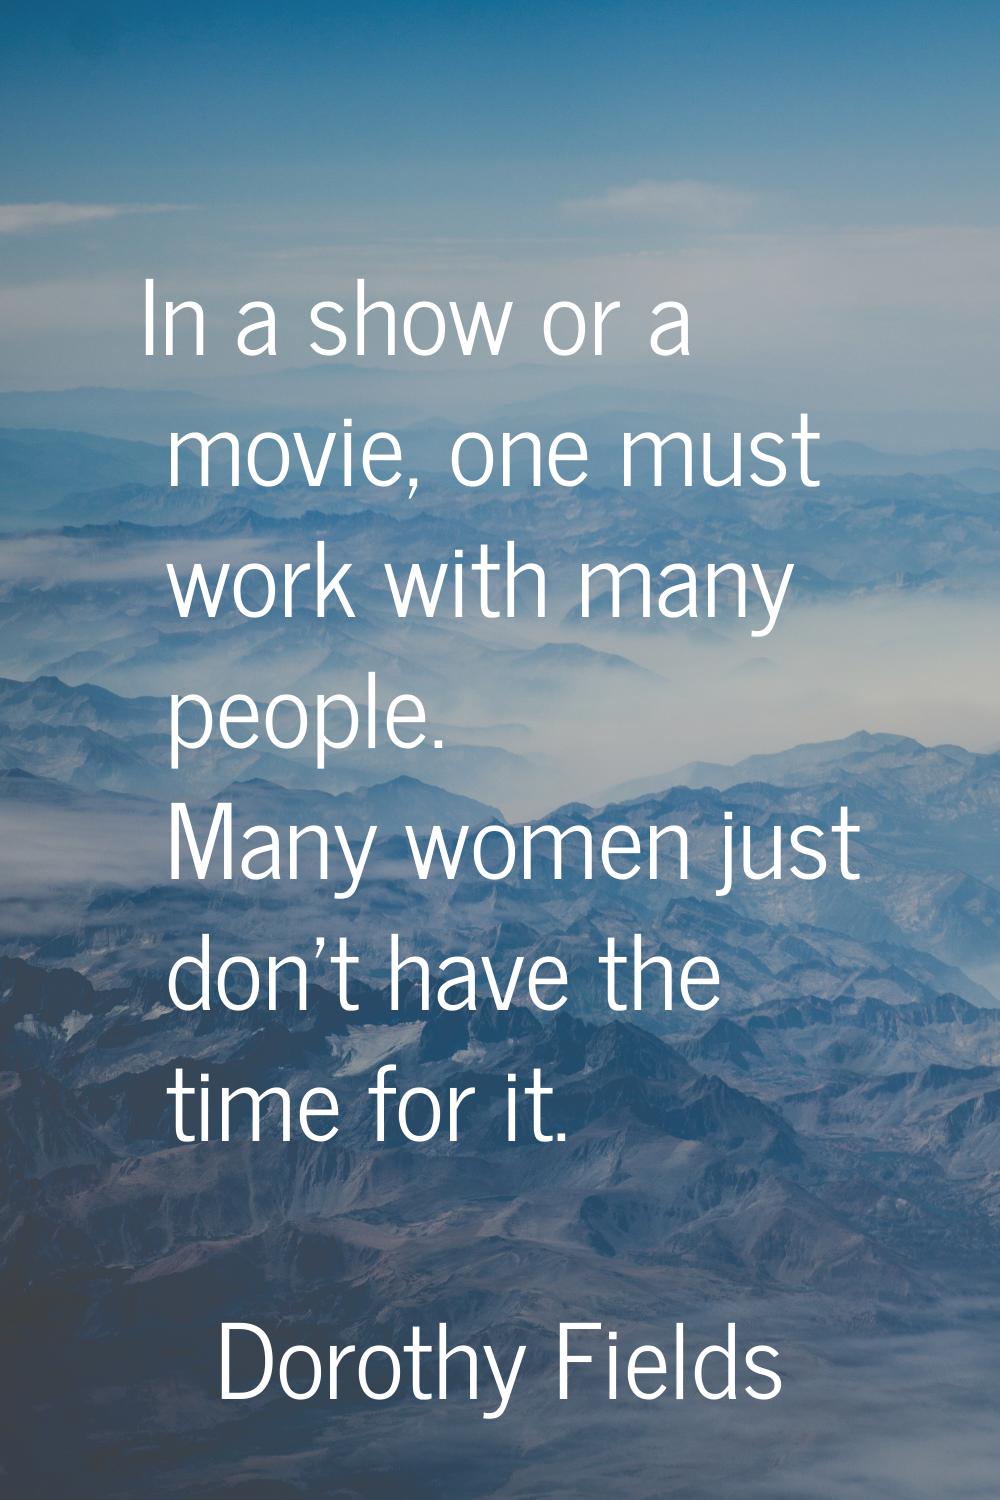 In a show or a movie, one must work with many people. Many women just don't have the time for it.